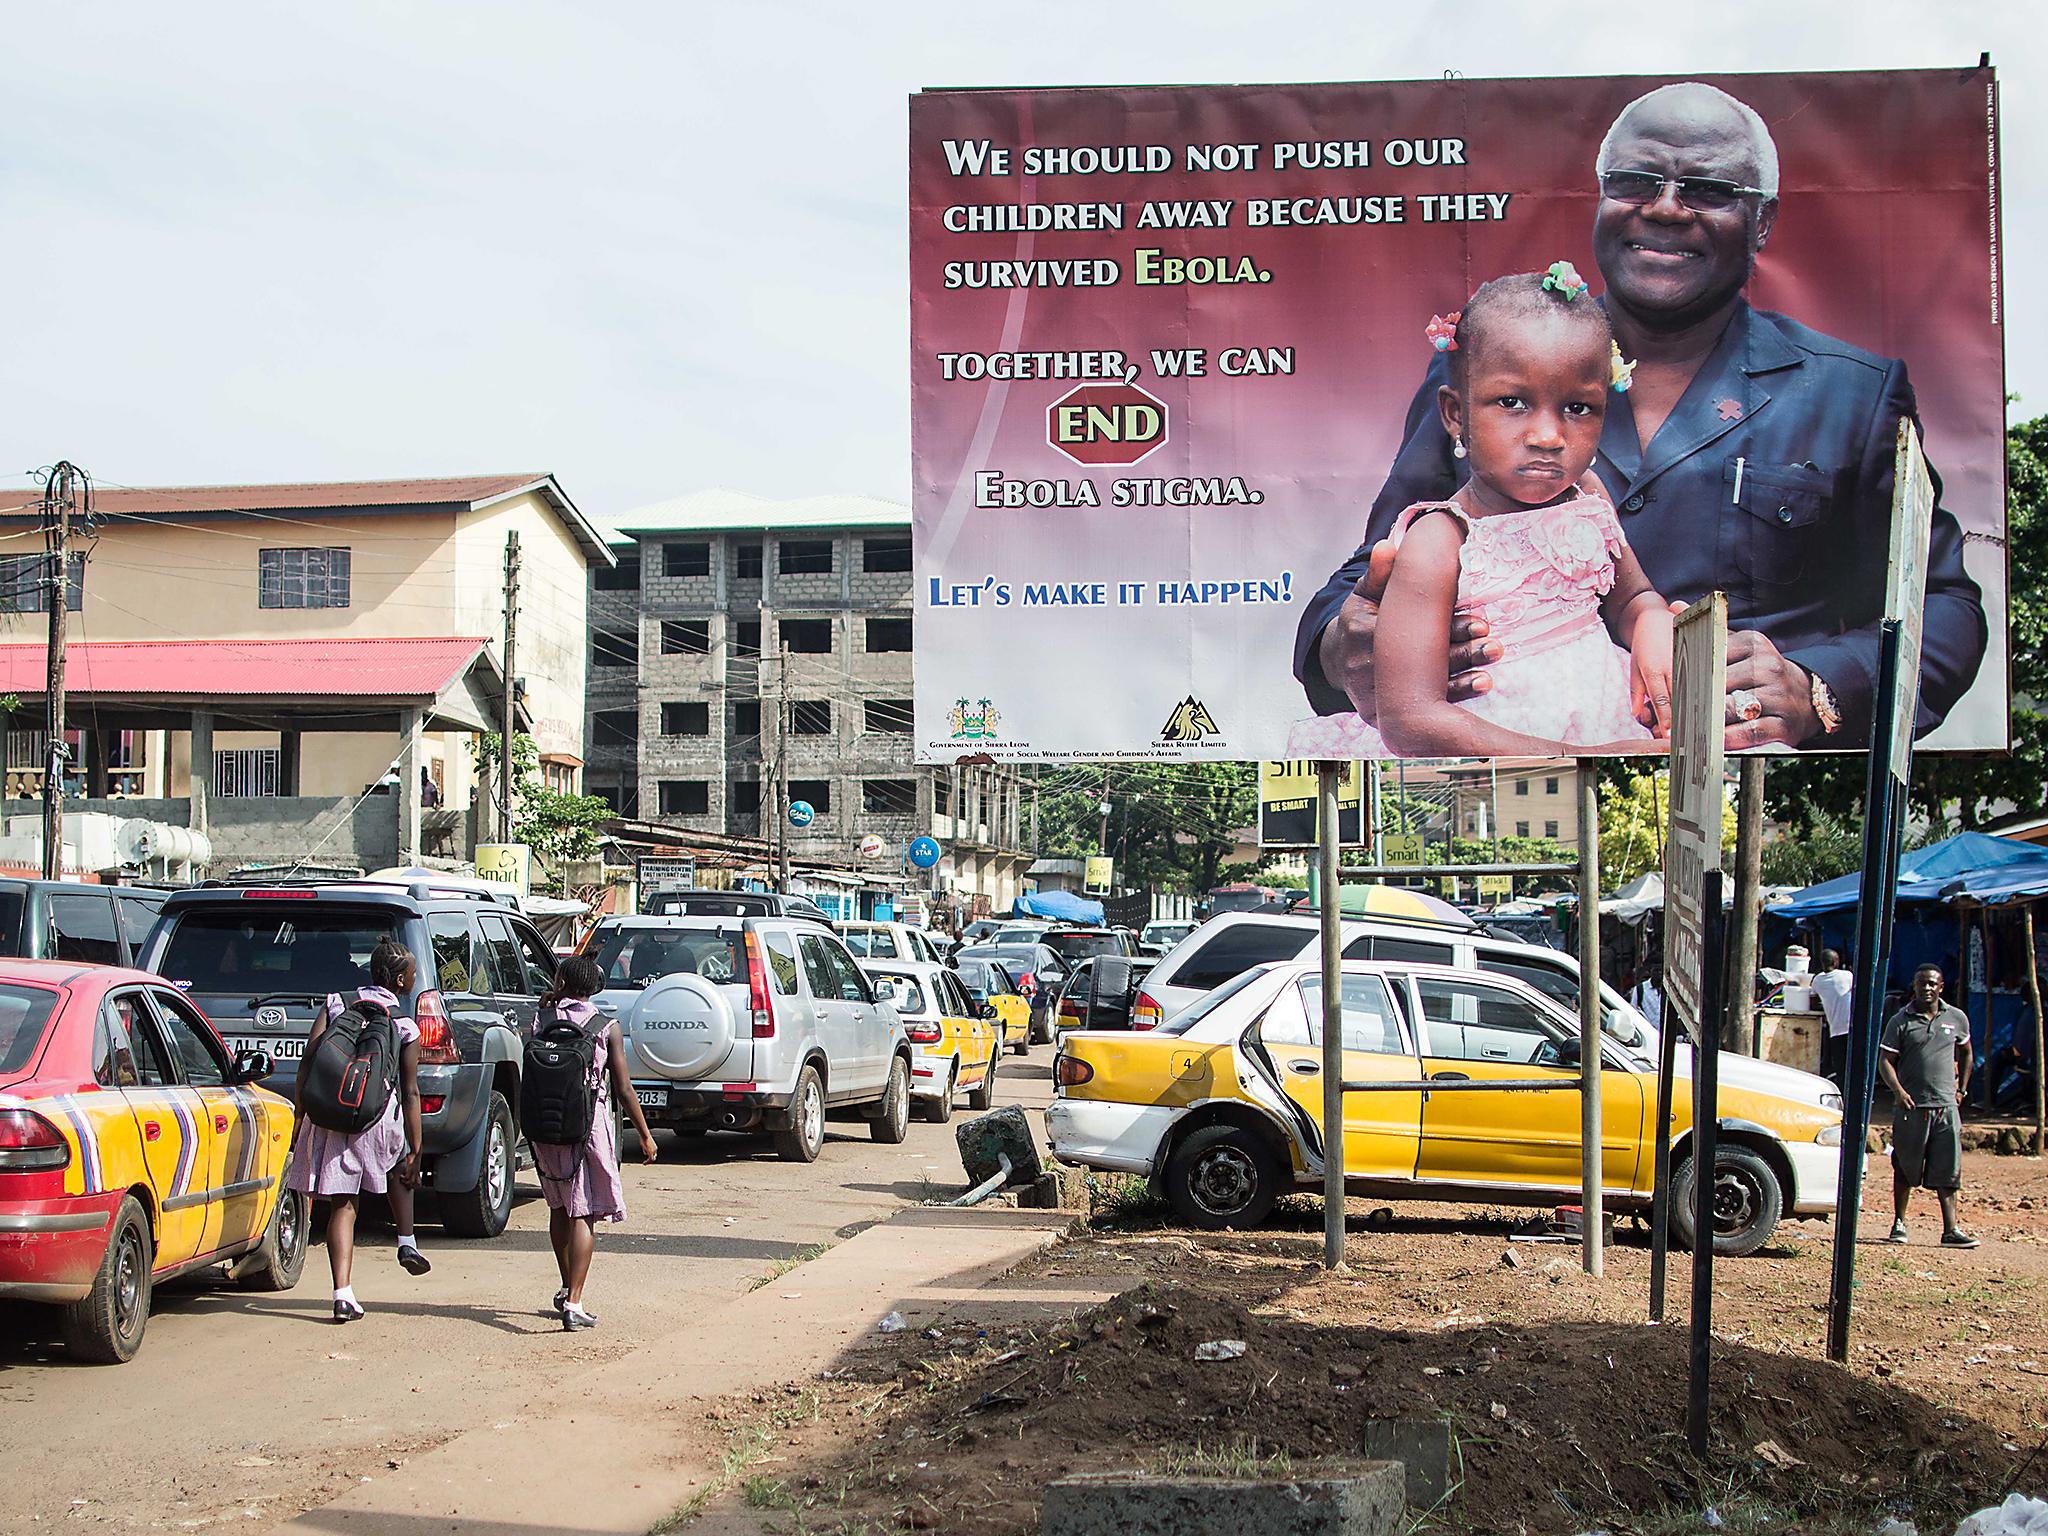 Posters remind people not to reject orphans of Ebola in Sierra Leone (Olivia Acland/Street Child)